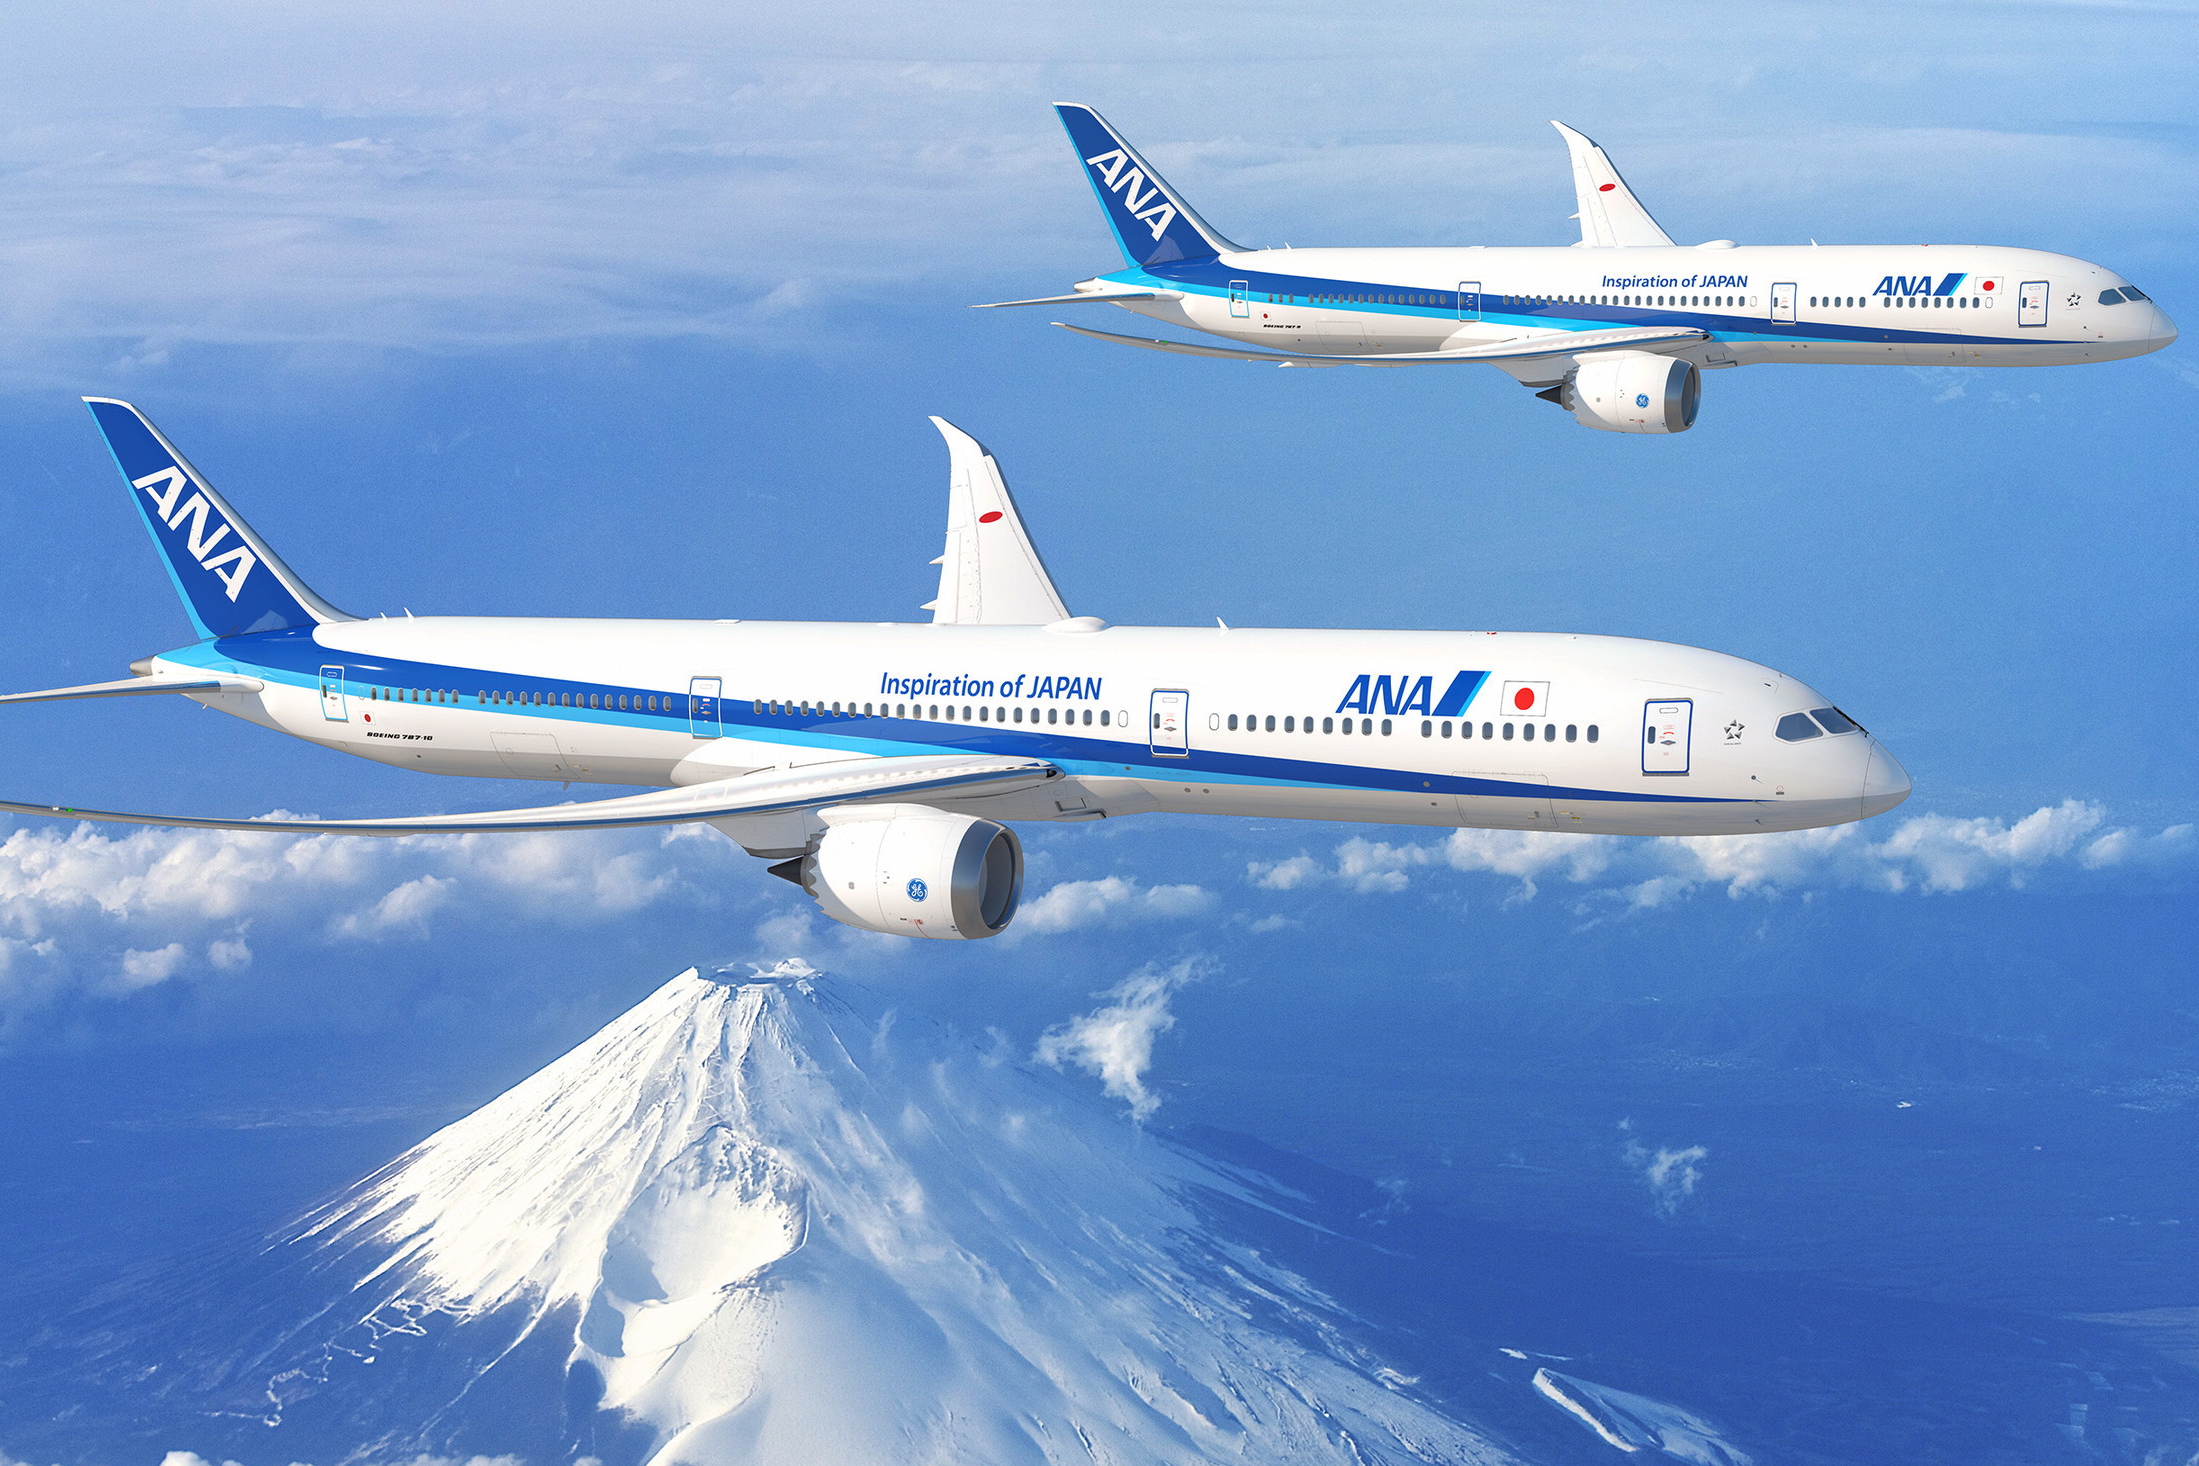 ANA has unveiled plans to acquire up to 20 more Boeing 787 Dreamliner airplanes. The agreement with Boeing includes 11 787-10s, one 787-9 and options for five 787-9s valued at more than $5 billion at list prices. The airline also plans to acquire three new 787-9 airplanes from Atlantis Aviation Corporation. Click to enlarge.